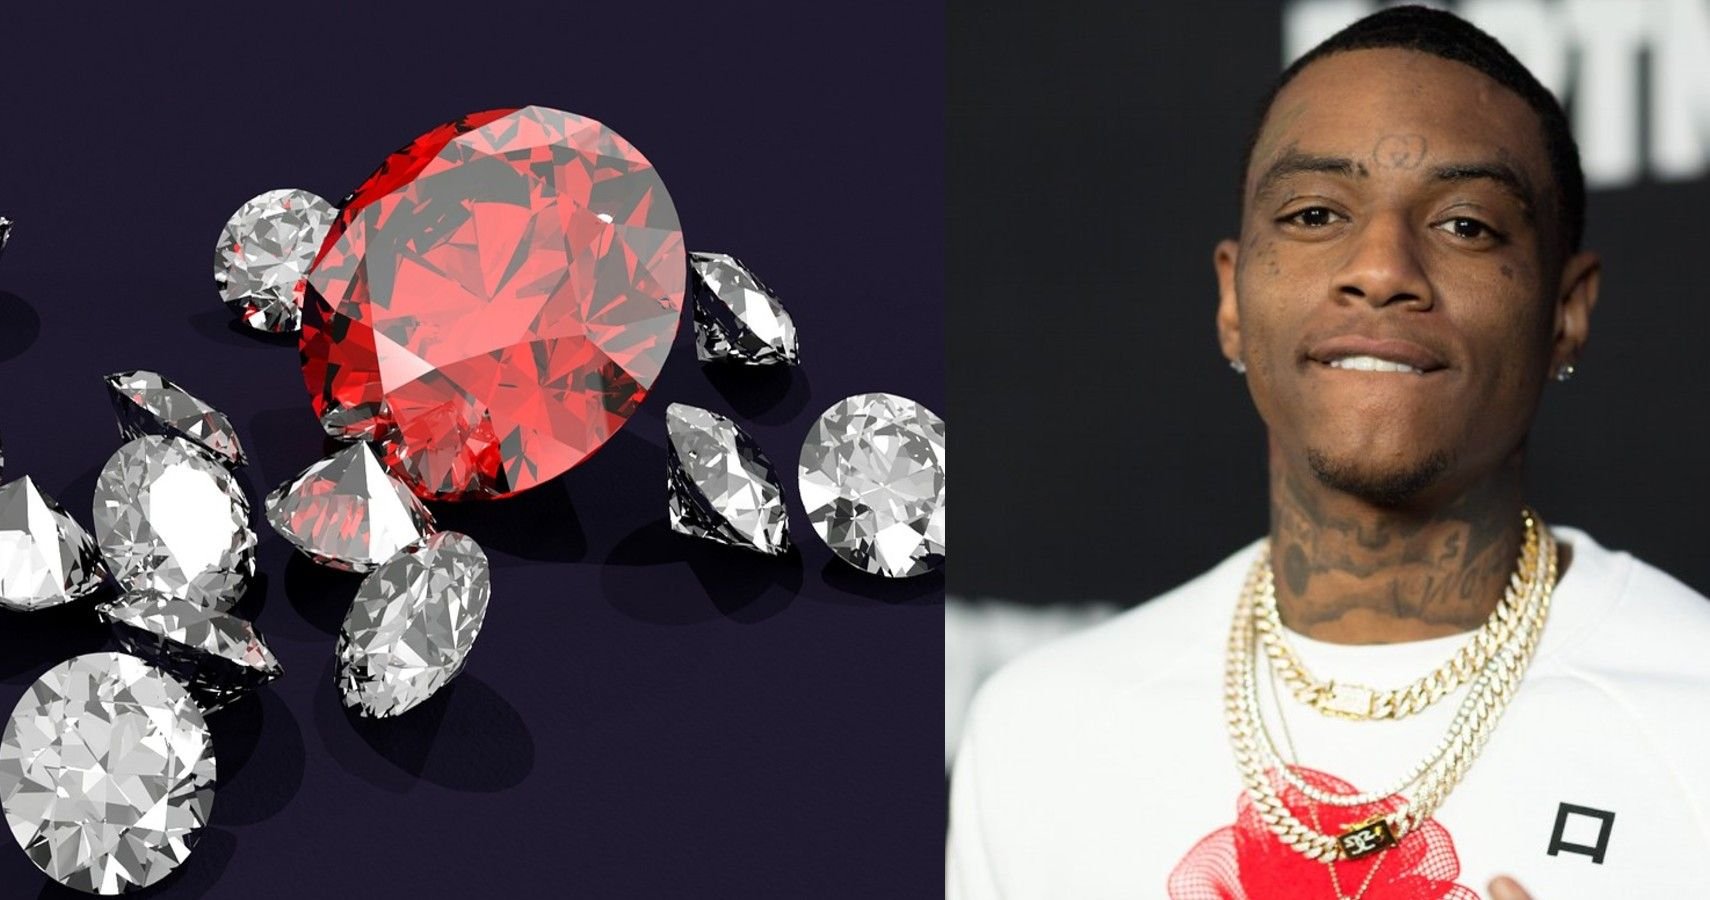 Soulja Boy Feuds With Jewelry Store 'Icebox' Over Alleged $200K Unpaid Bill